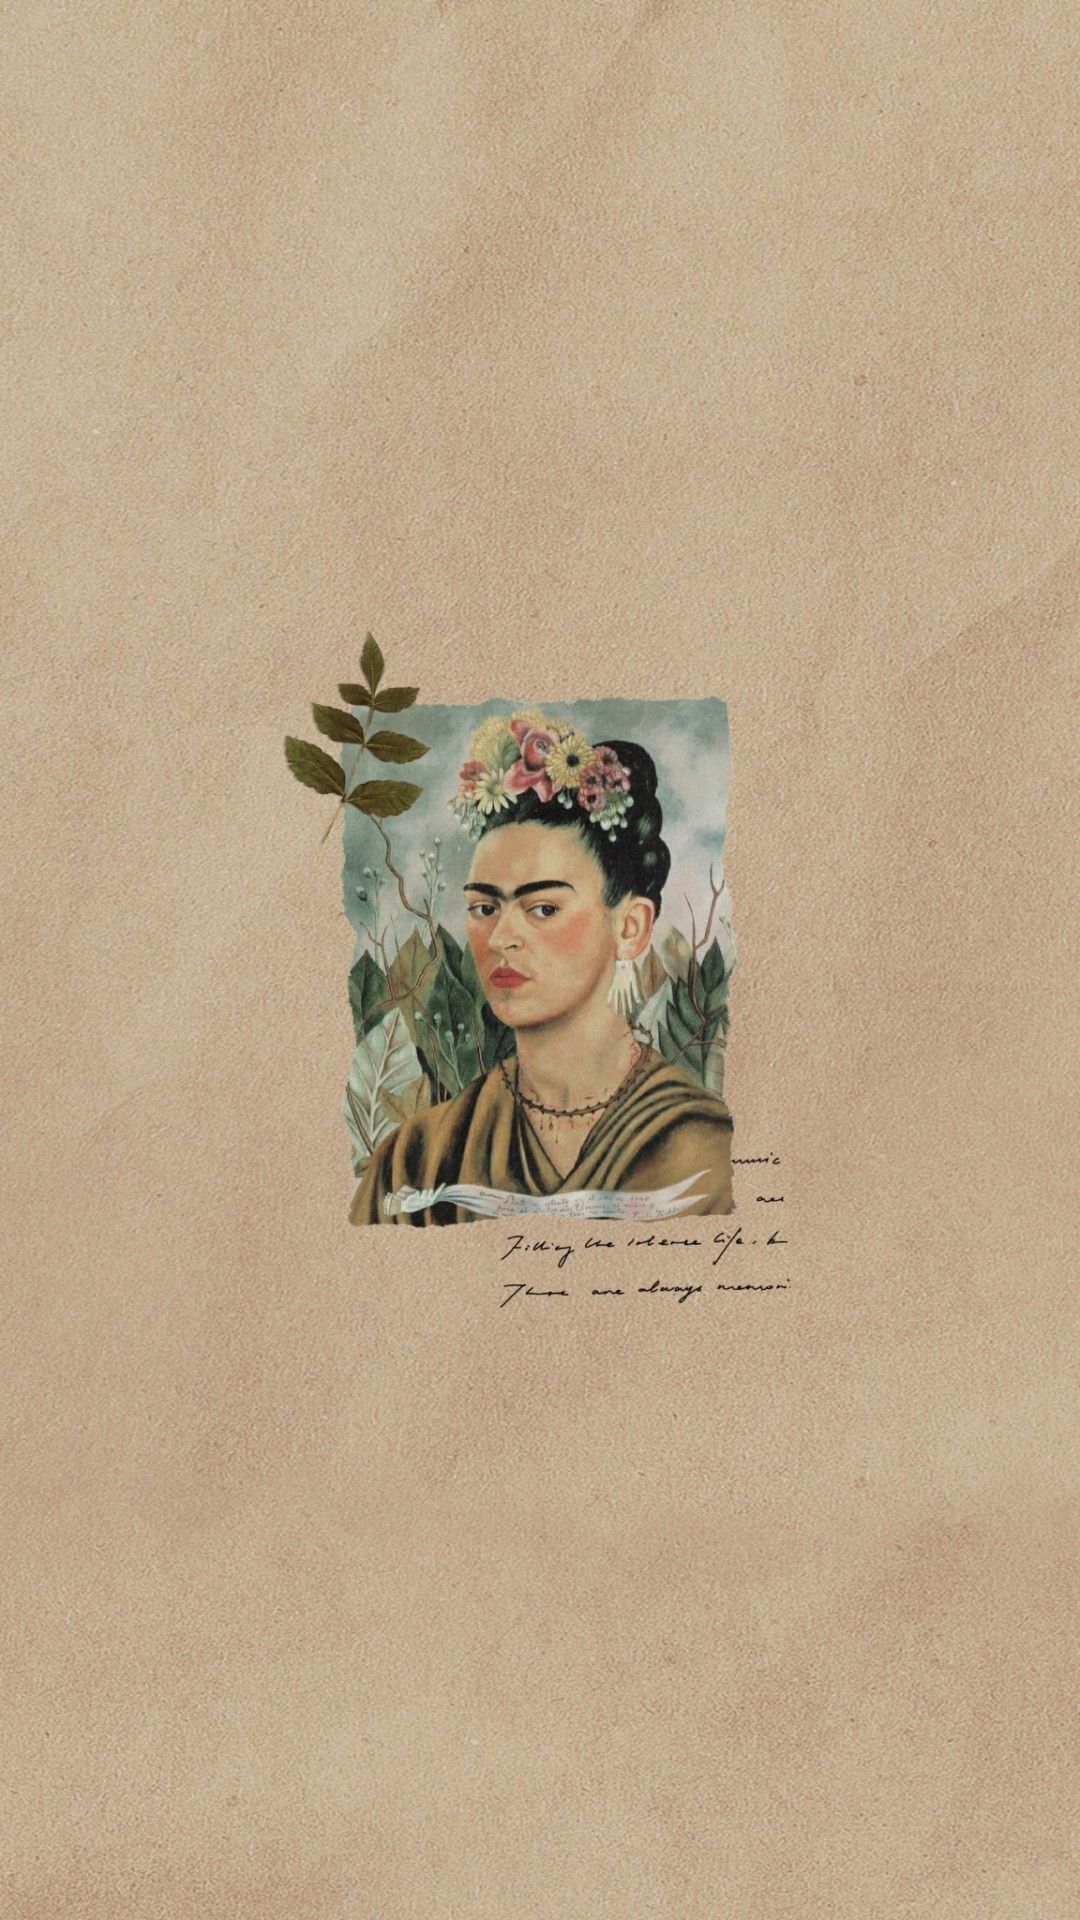 IPhone wallpaper frida kahlo with high-resolution 1080x1920 pixel. You can use this wallpaper for your iPhone 5, 6, 7, 8, X, XS, XR backgrounds, Mobile Screensaver, or iPad Lock Screen - Frida Kahlo